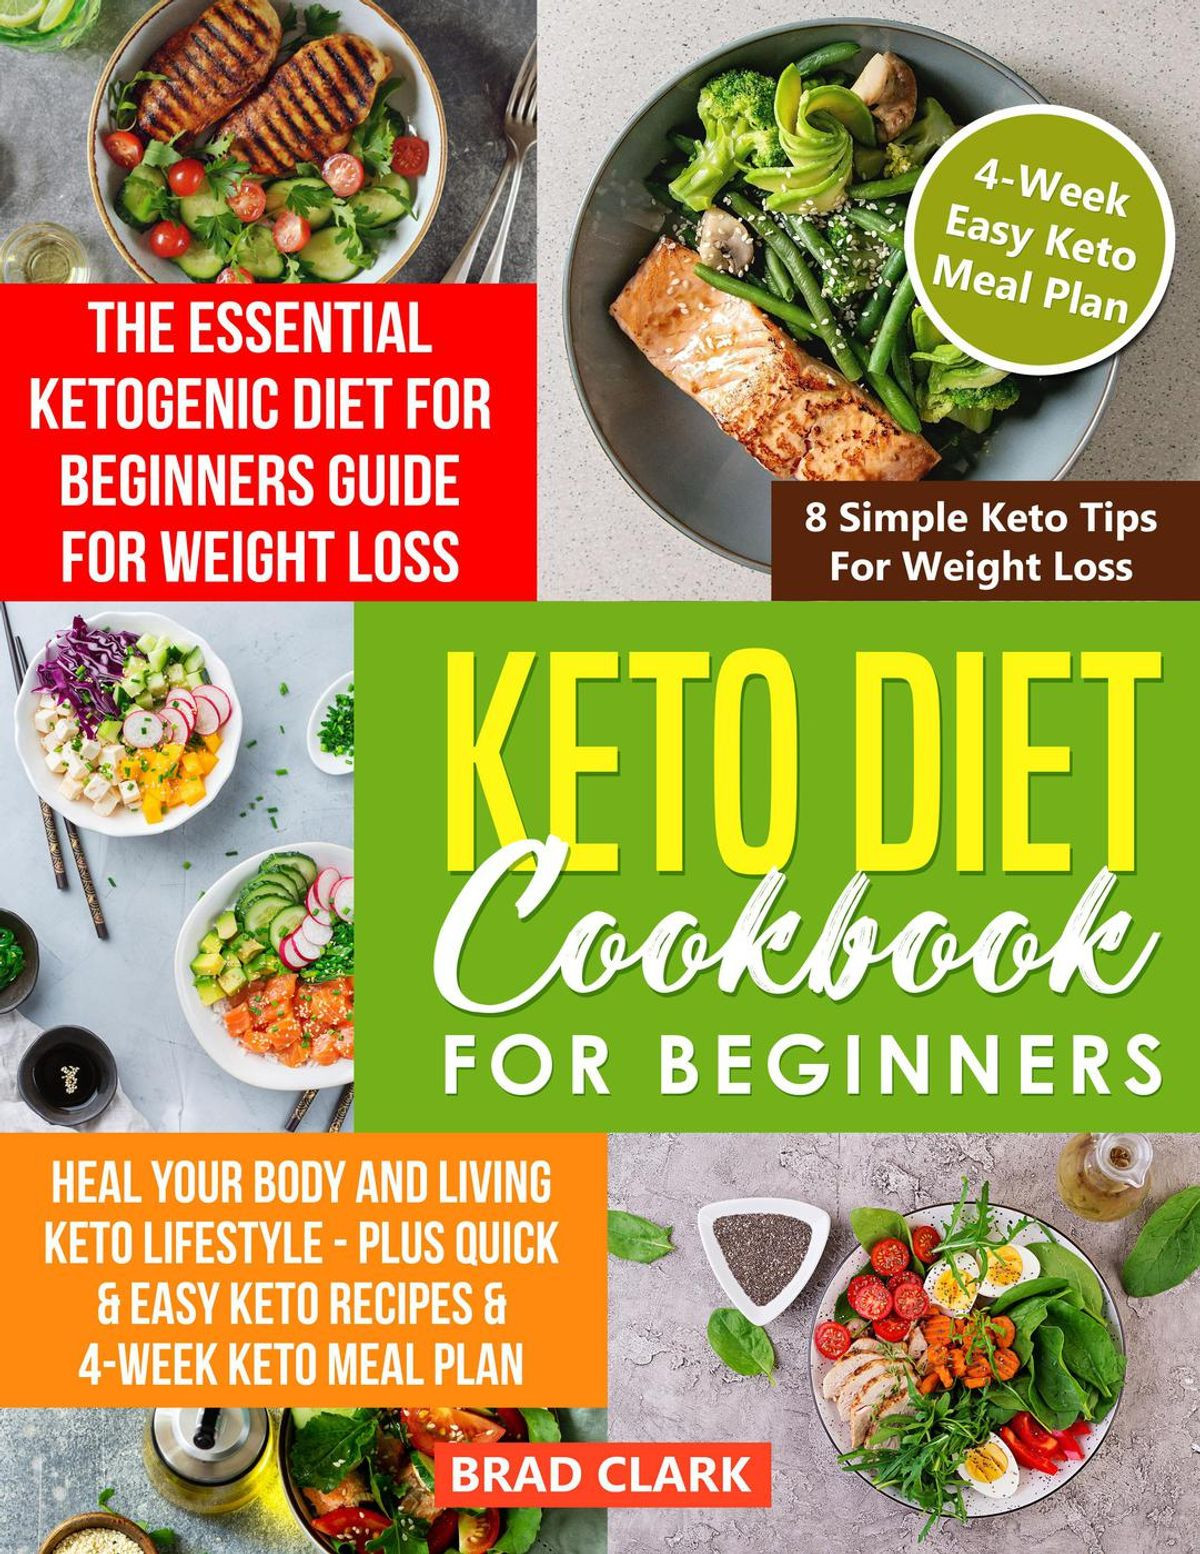 Keto Diet For Beginners Losing Weight Easy
 Keto Diet Cookbook for Beginners The Essential Ketogenic